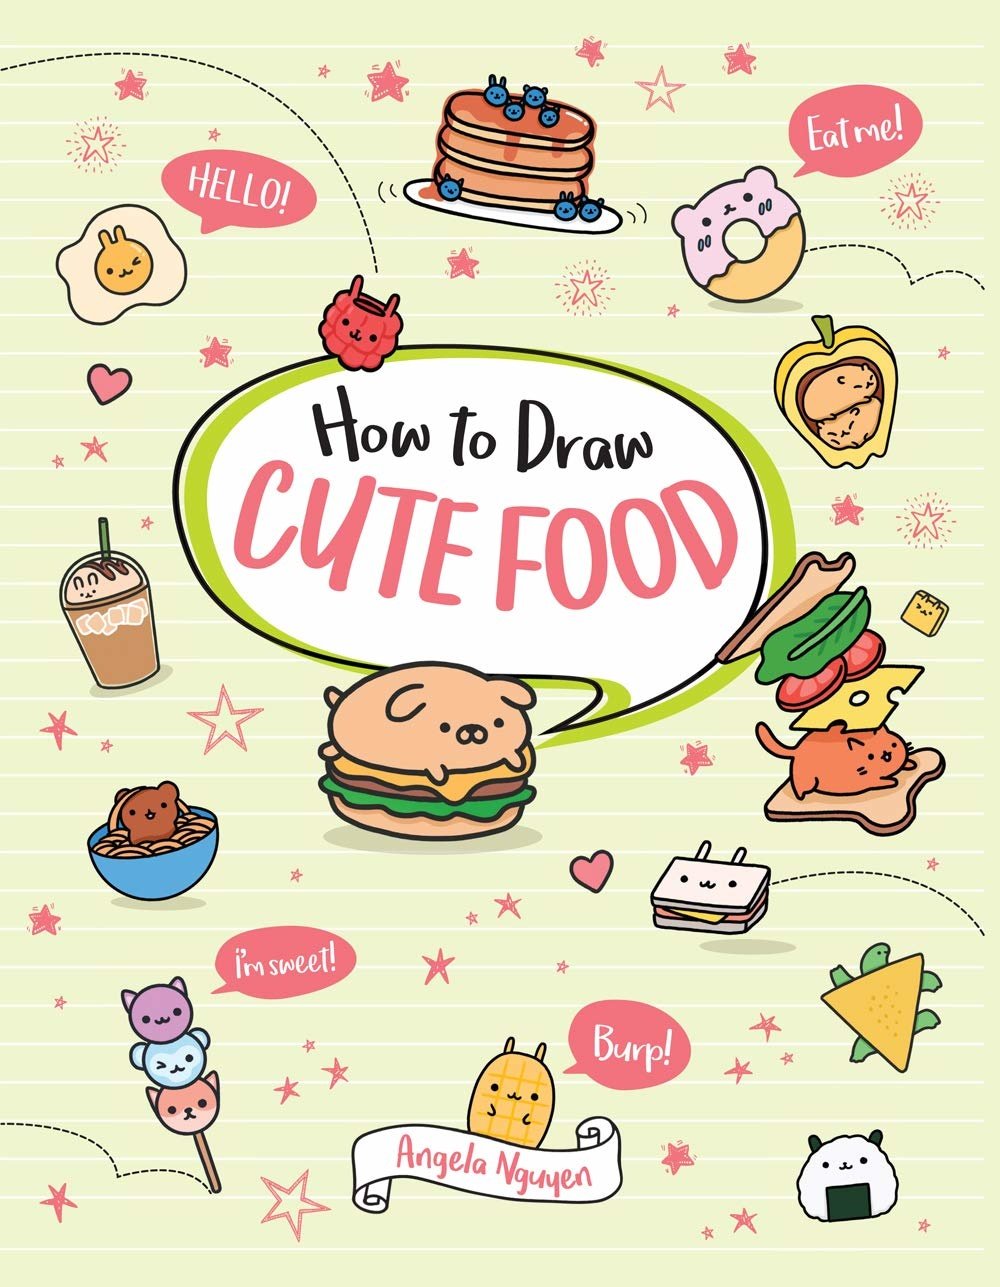 How to Draw Cute and Cute Kawaii KITTEN / Cute Drawings - Drawing to Draw 